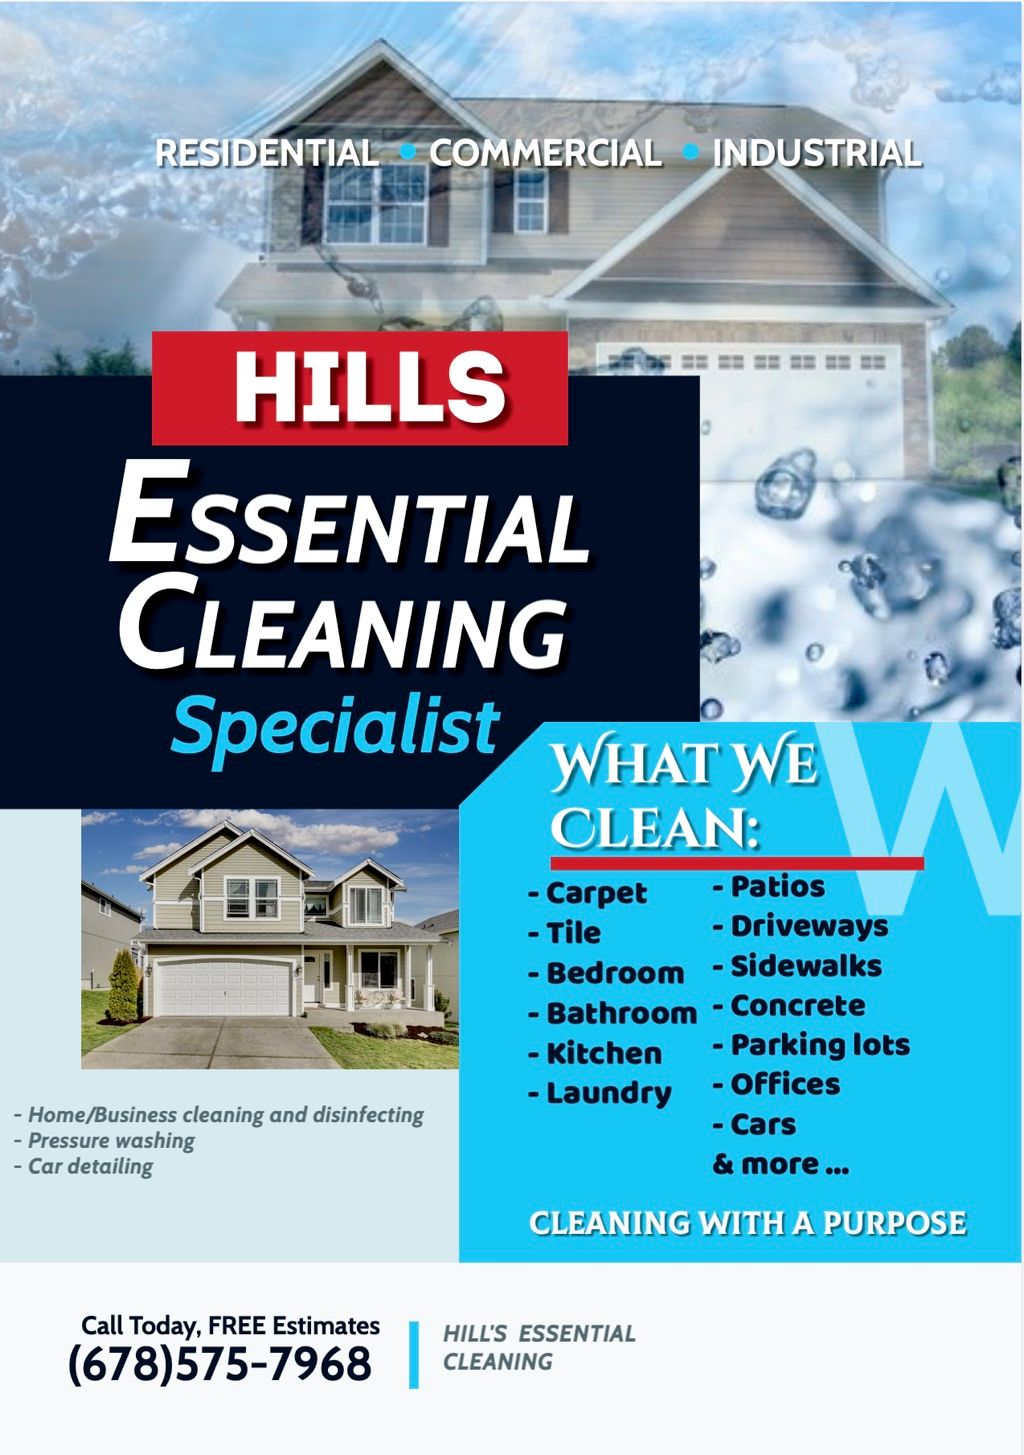 HILL’S ESSENTIAL CLEANING